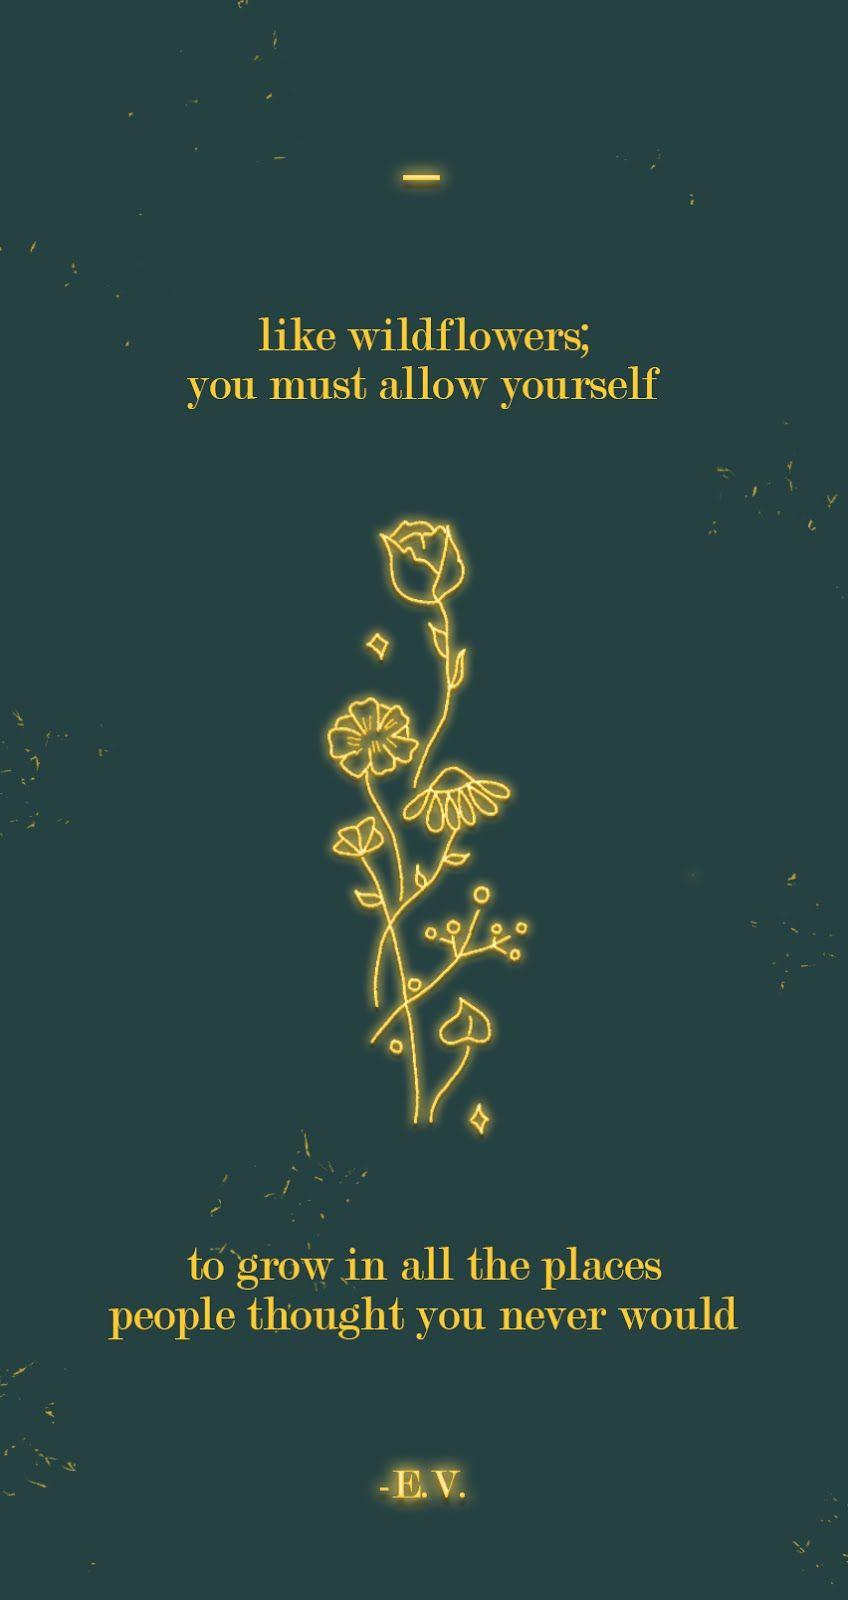 71 Lock Screen Quotes for Phone Wallpaper - Darling Quote